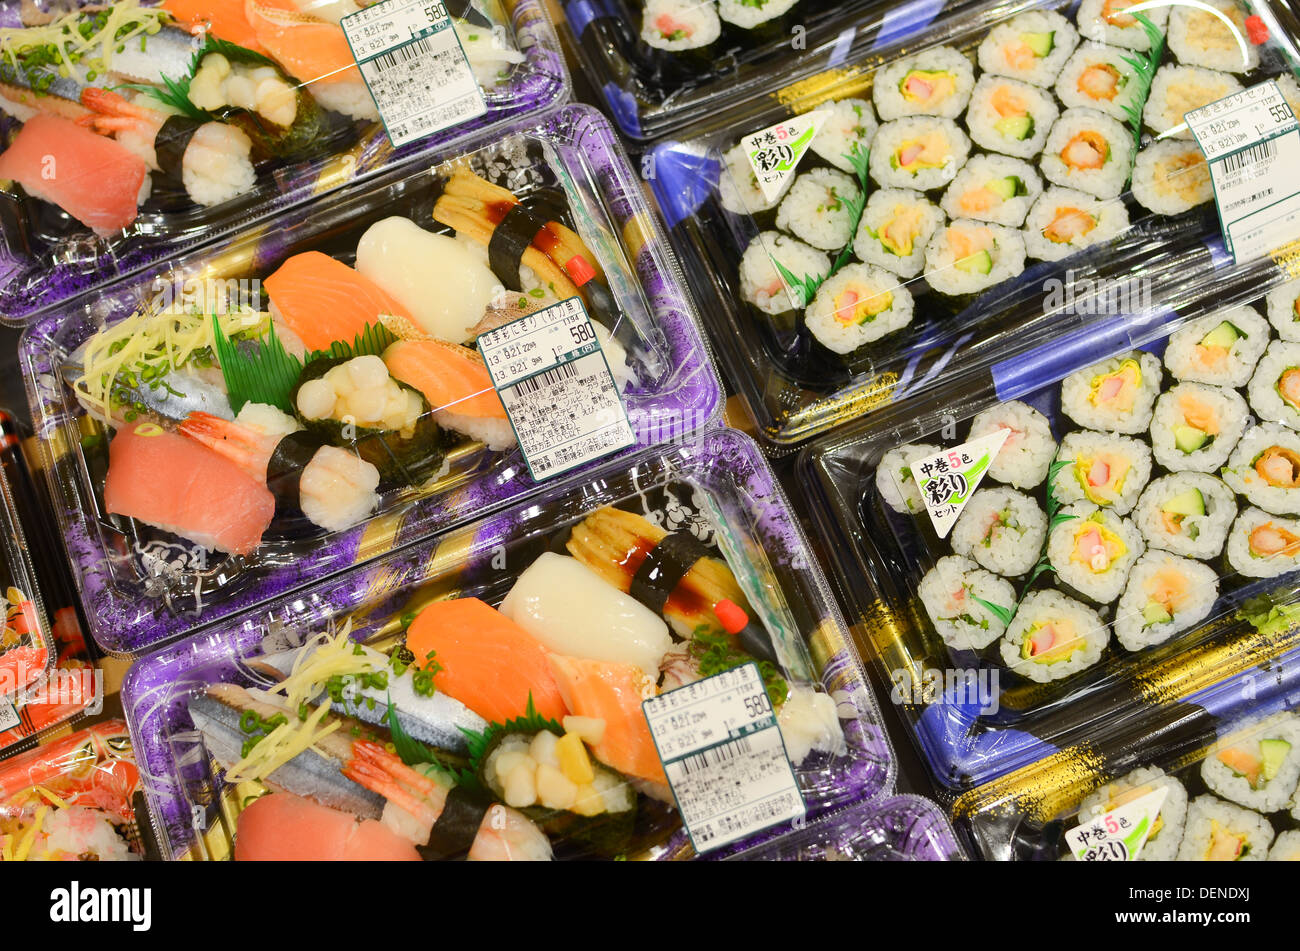 Sushi for sale in a supermarket in Japan. Stock Photo